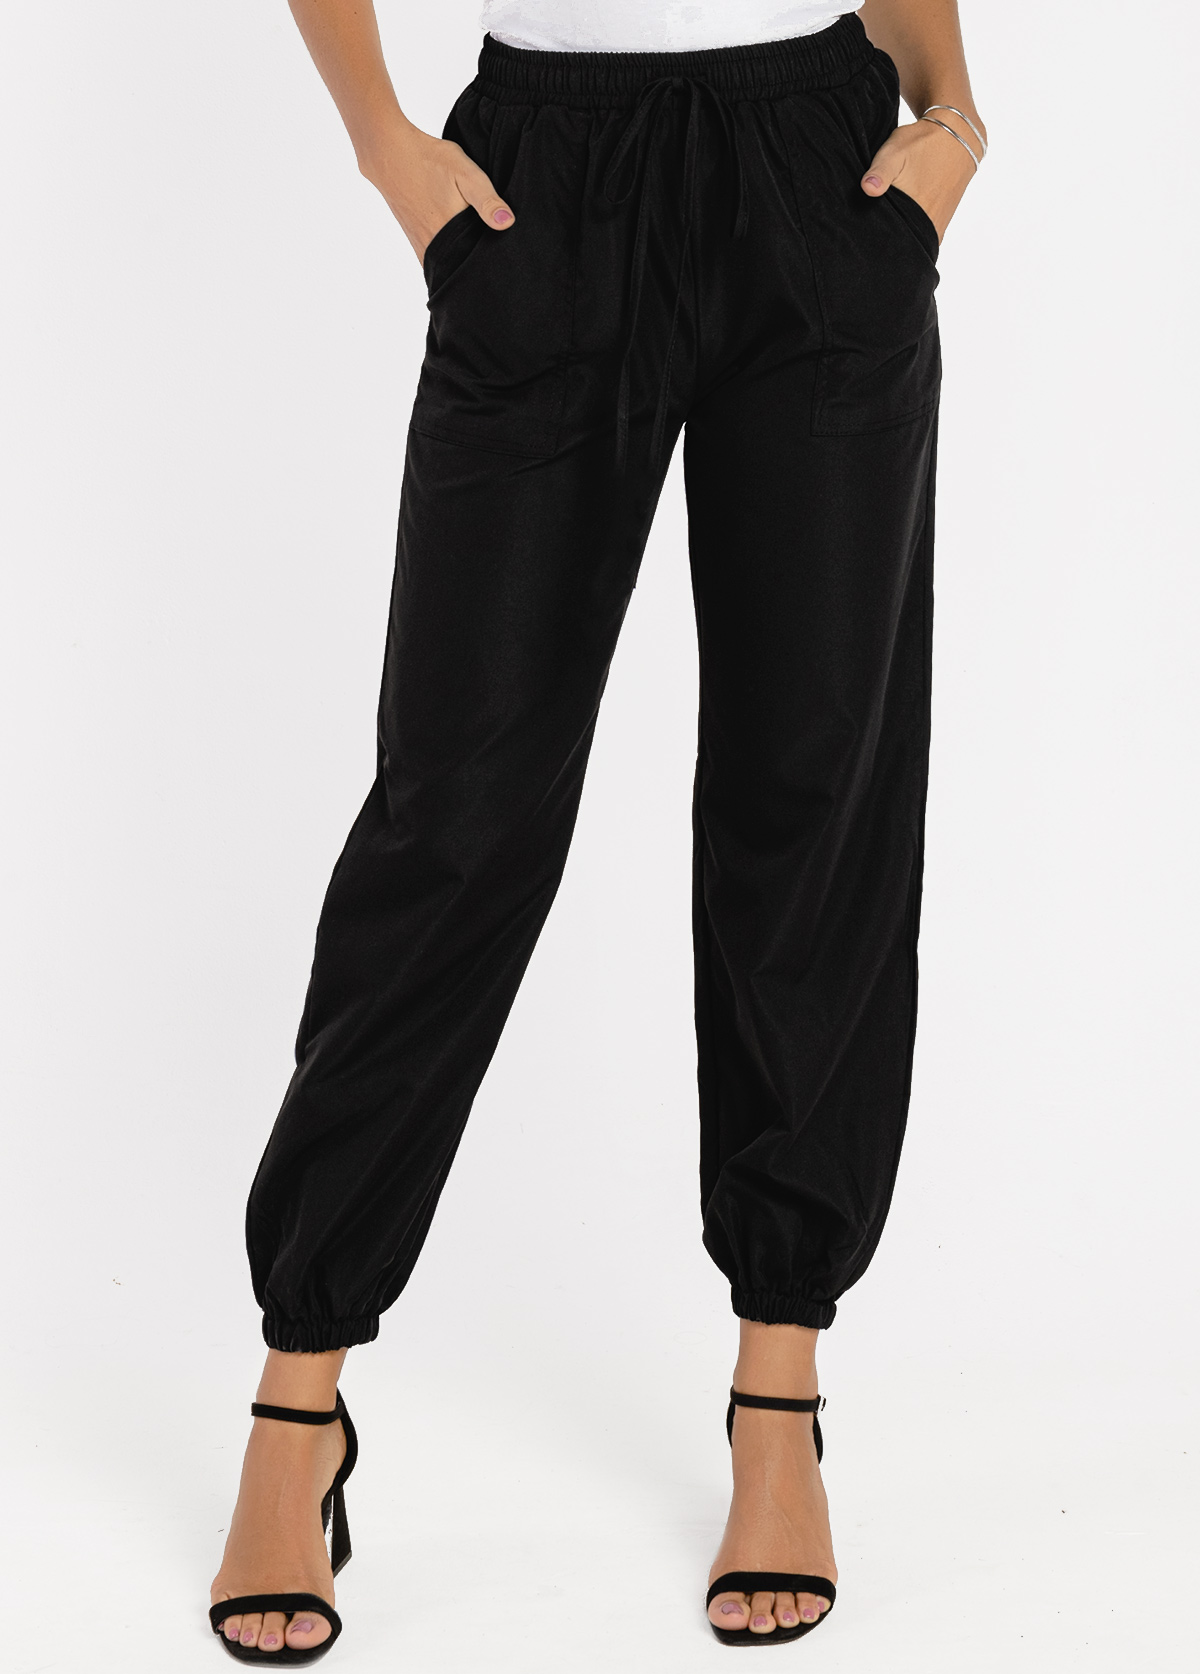 Black High Waisted Pocket Tie Front Pants